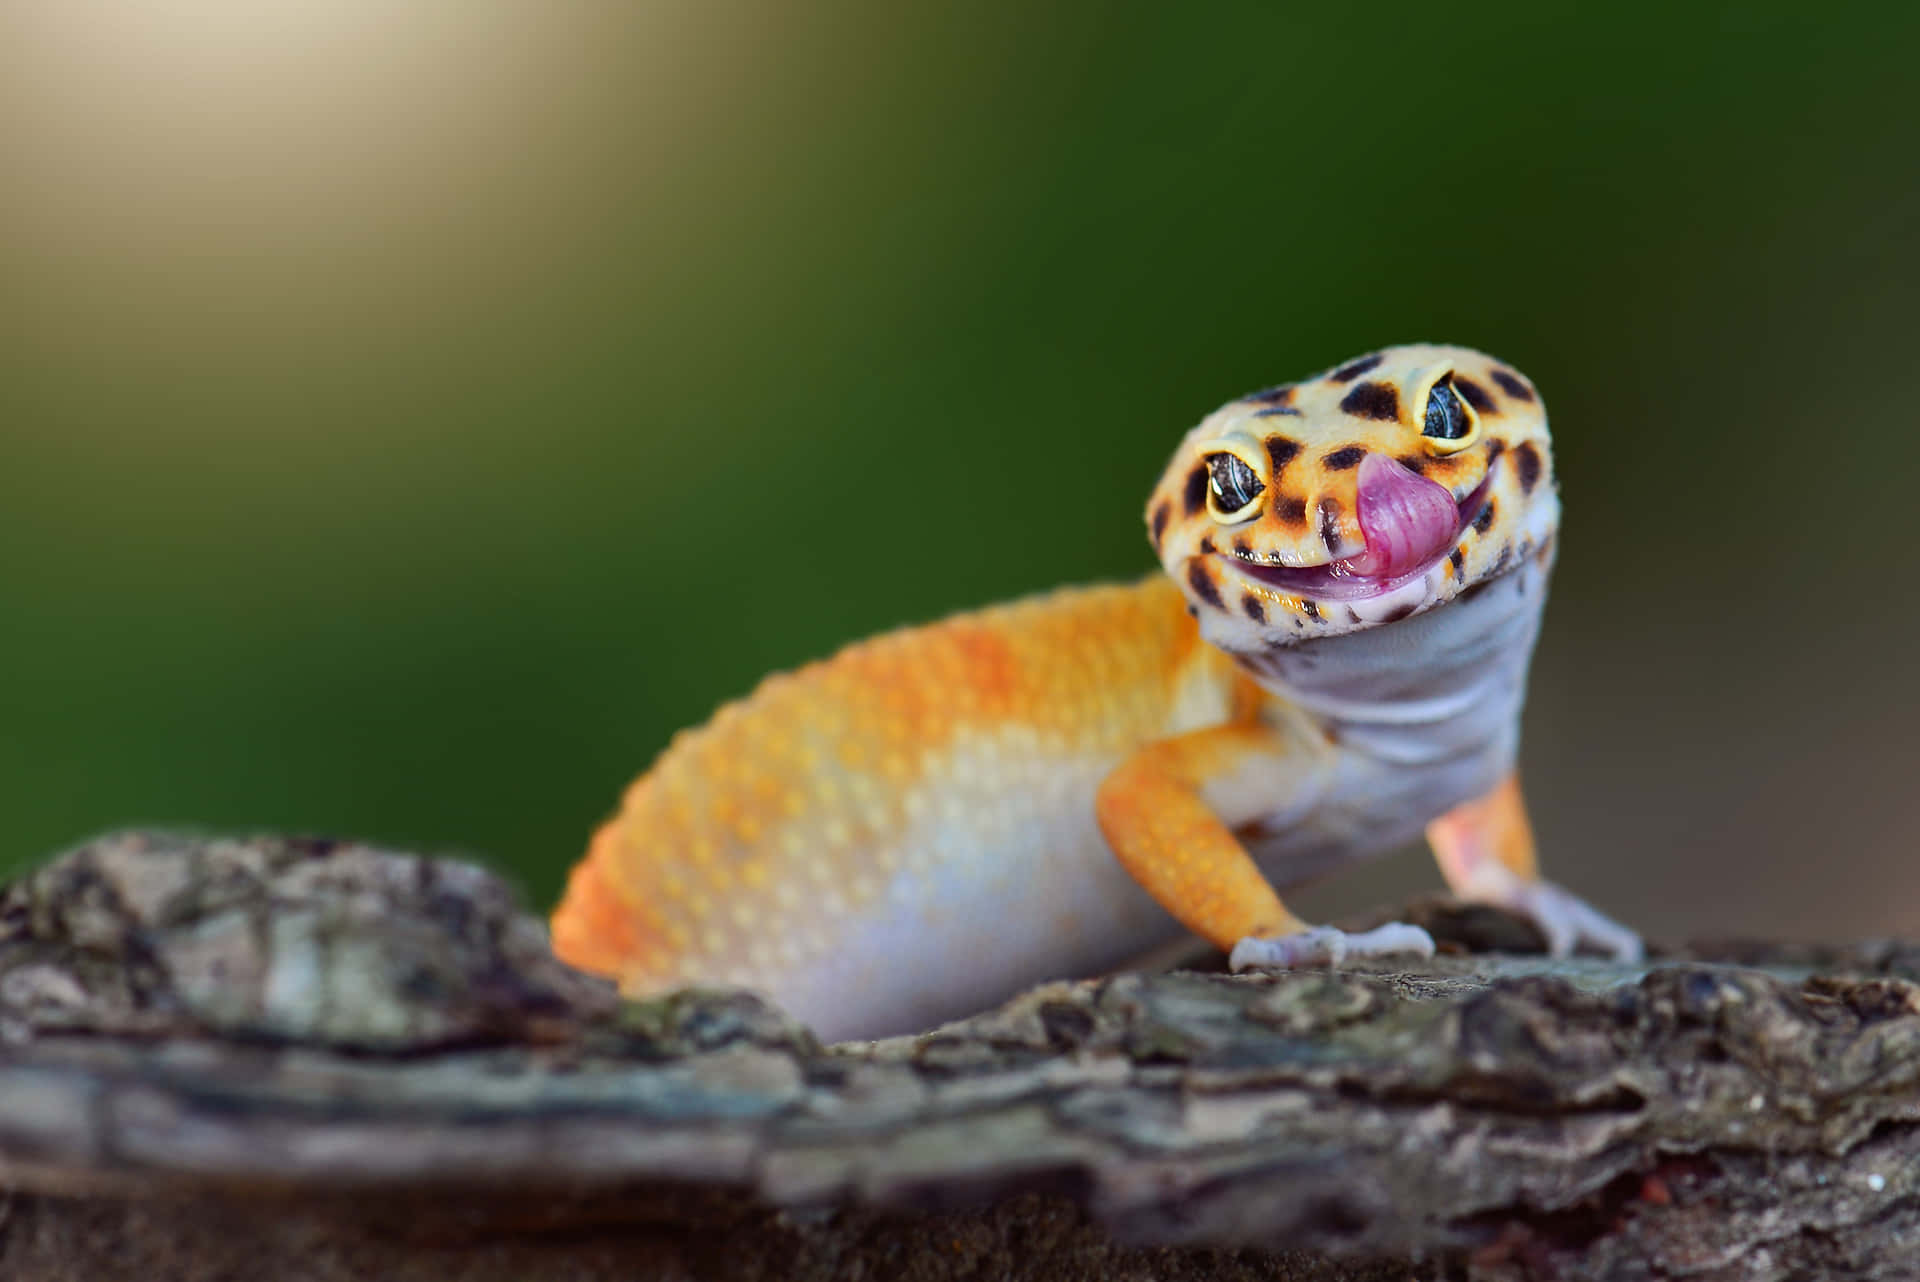 A Gecko Is Sitting On A Tree Stump